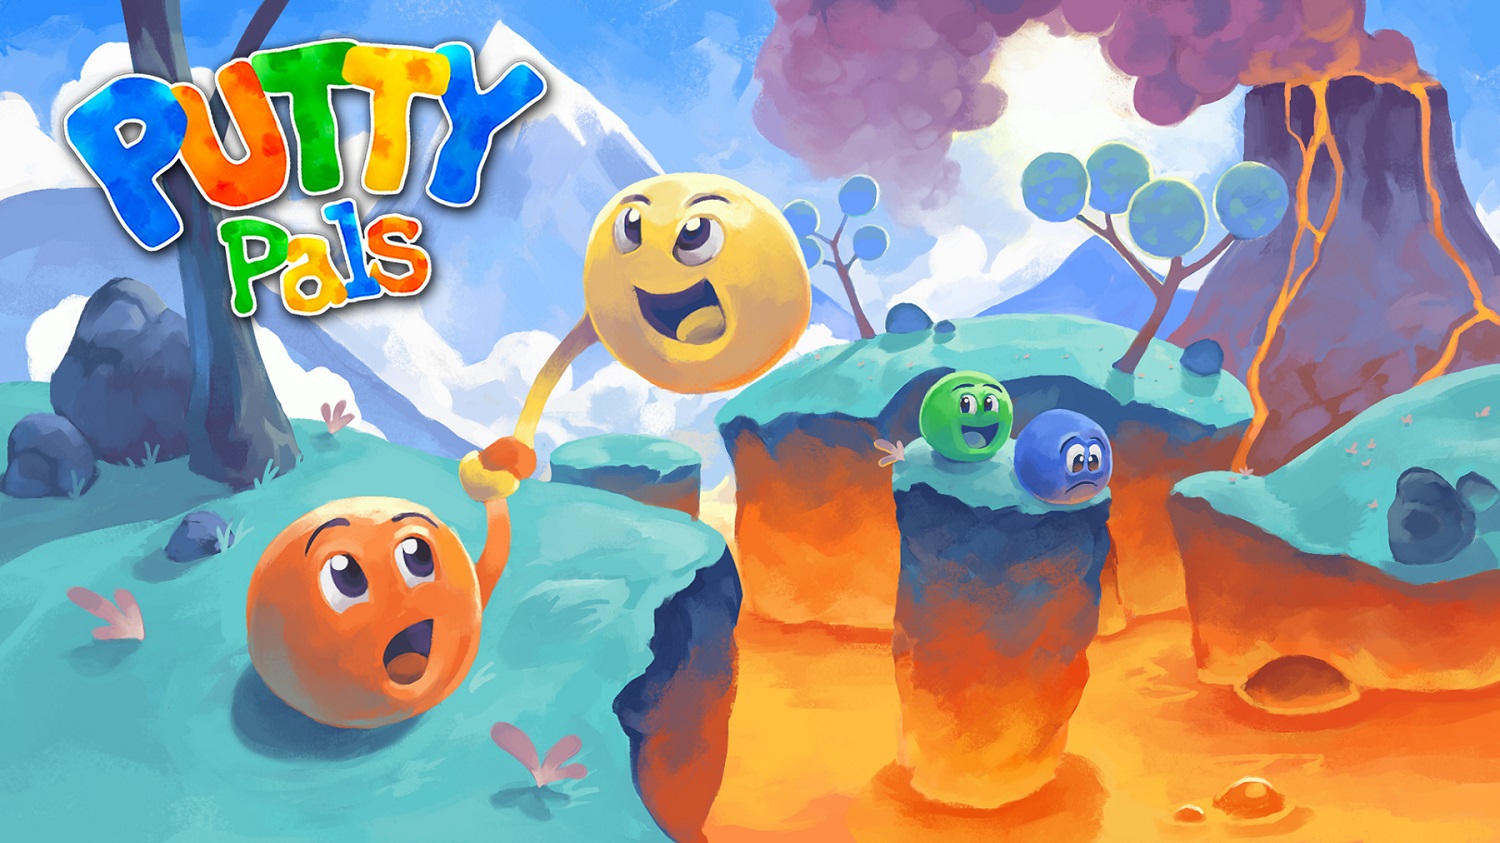 Putty Pals is coming to the Nintendo Switch